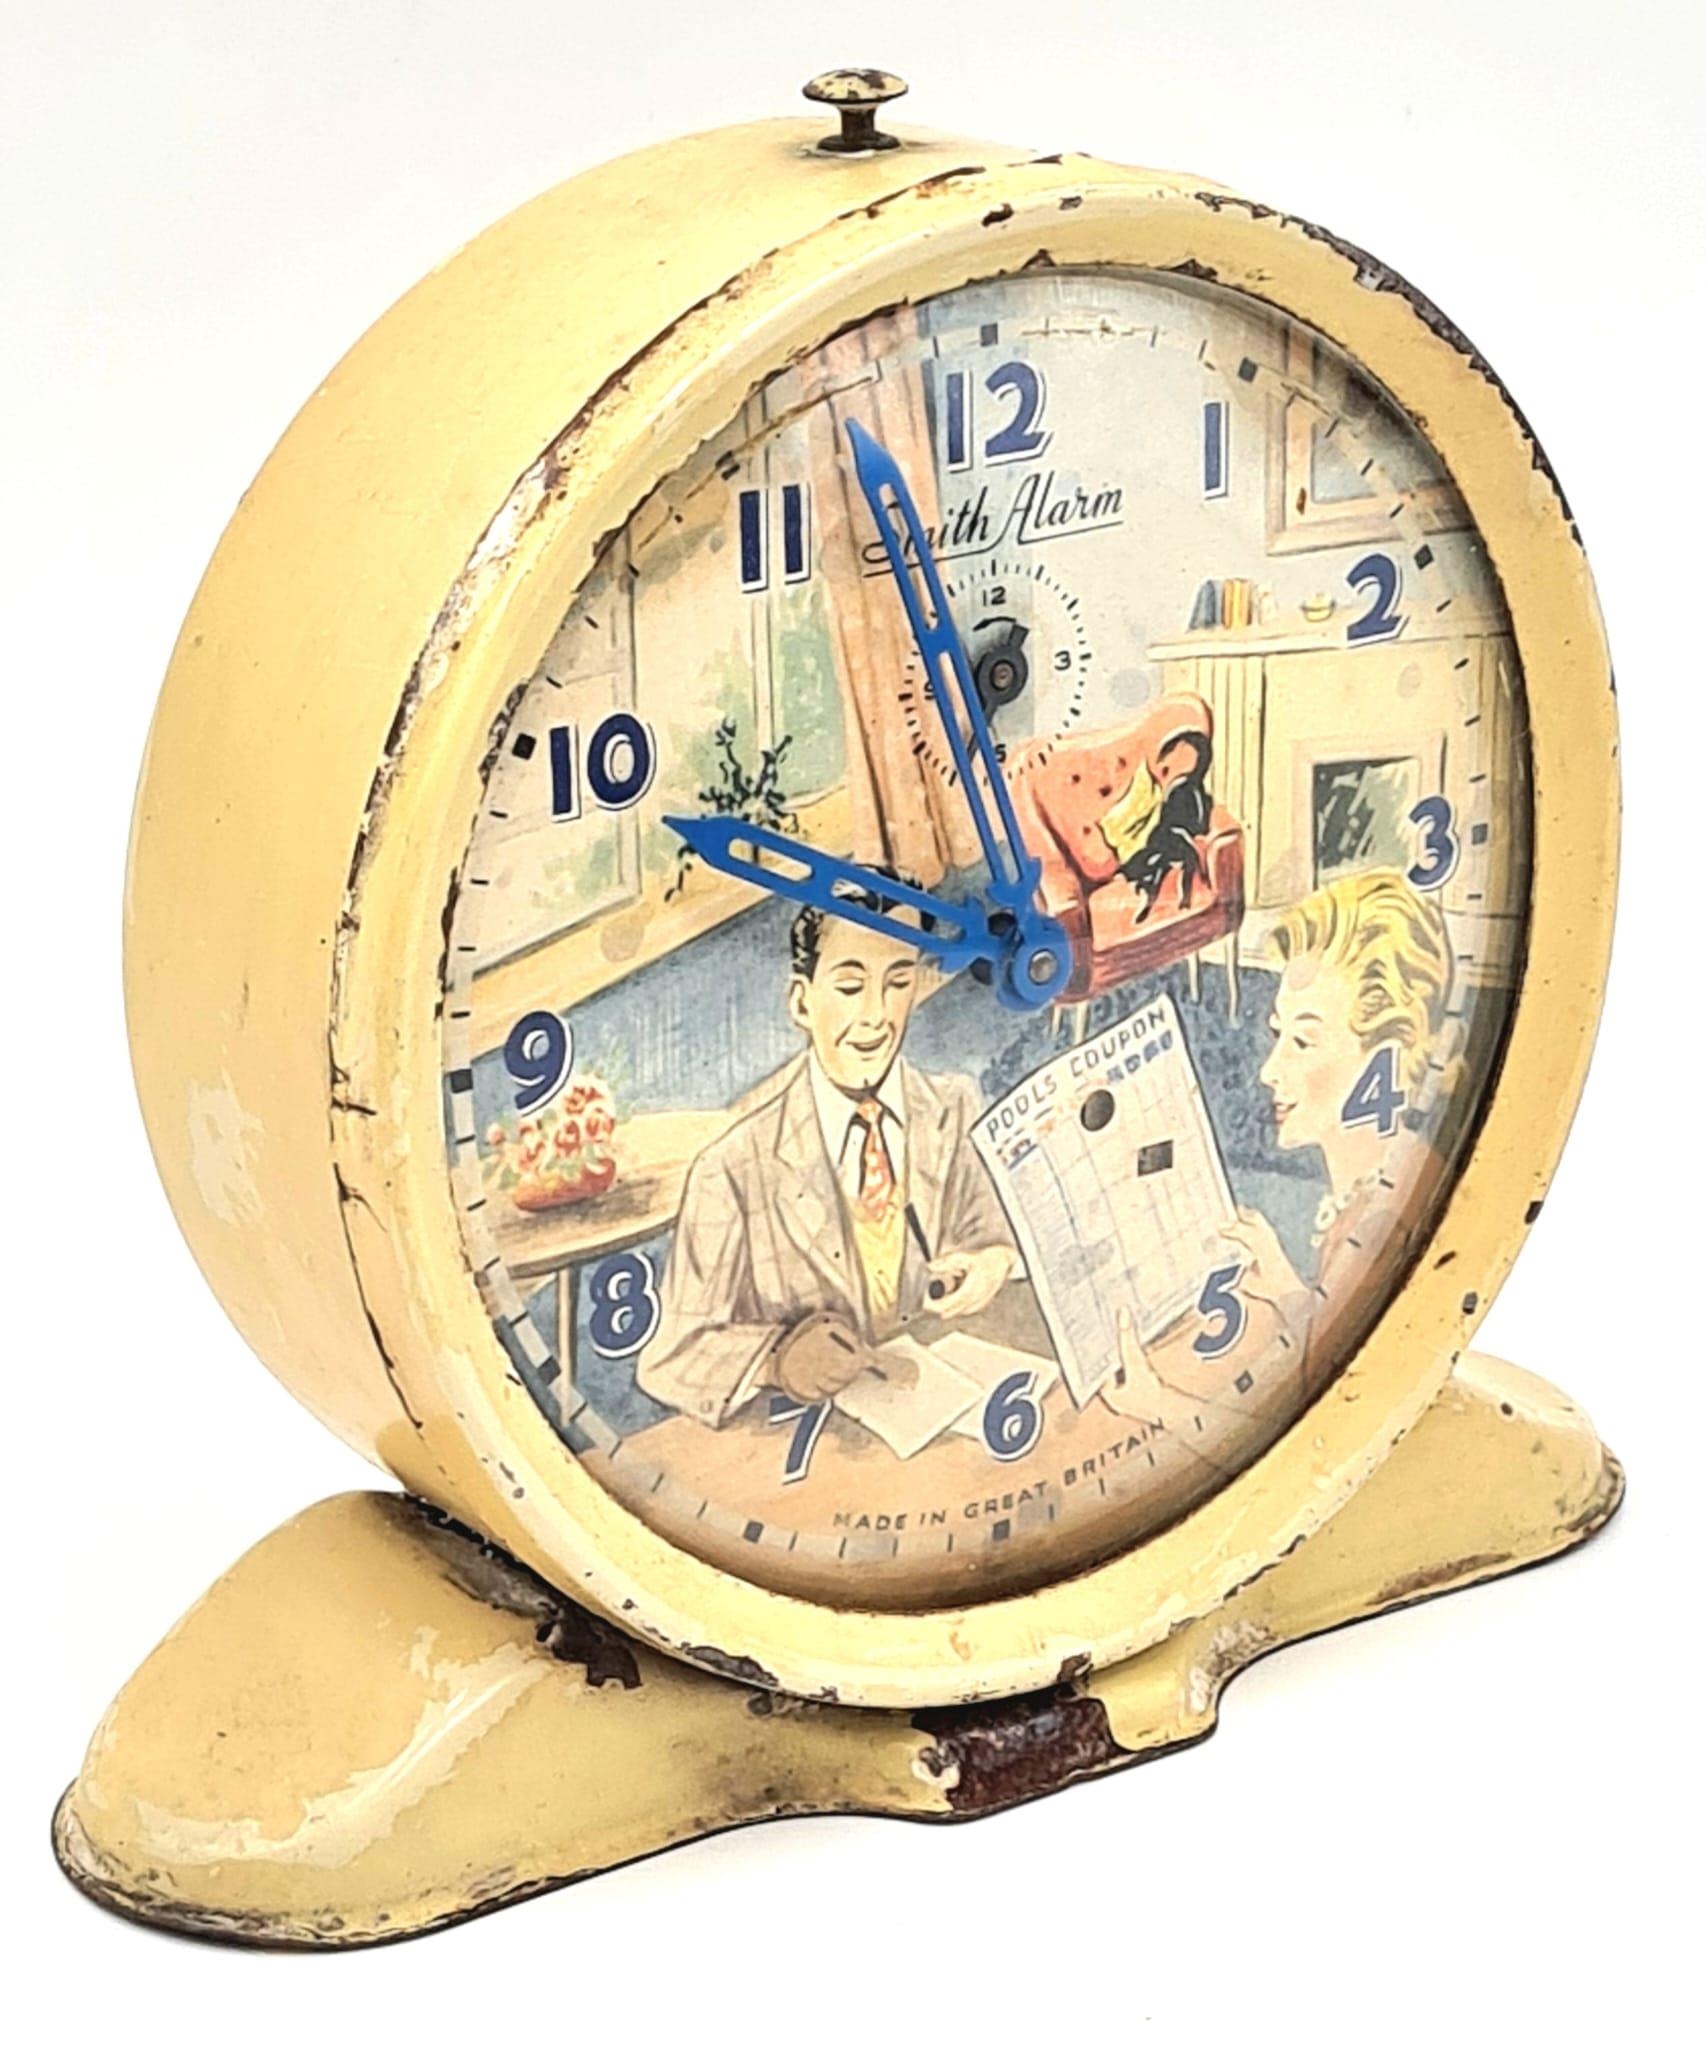 A Classic Smiths Vintage Pools Alarm Clock. Pen and pools coupon move! Works but a/f. 12cm tall. - Image 2 of 5